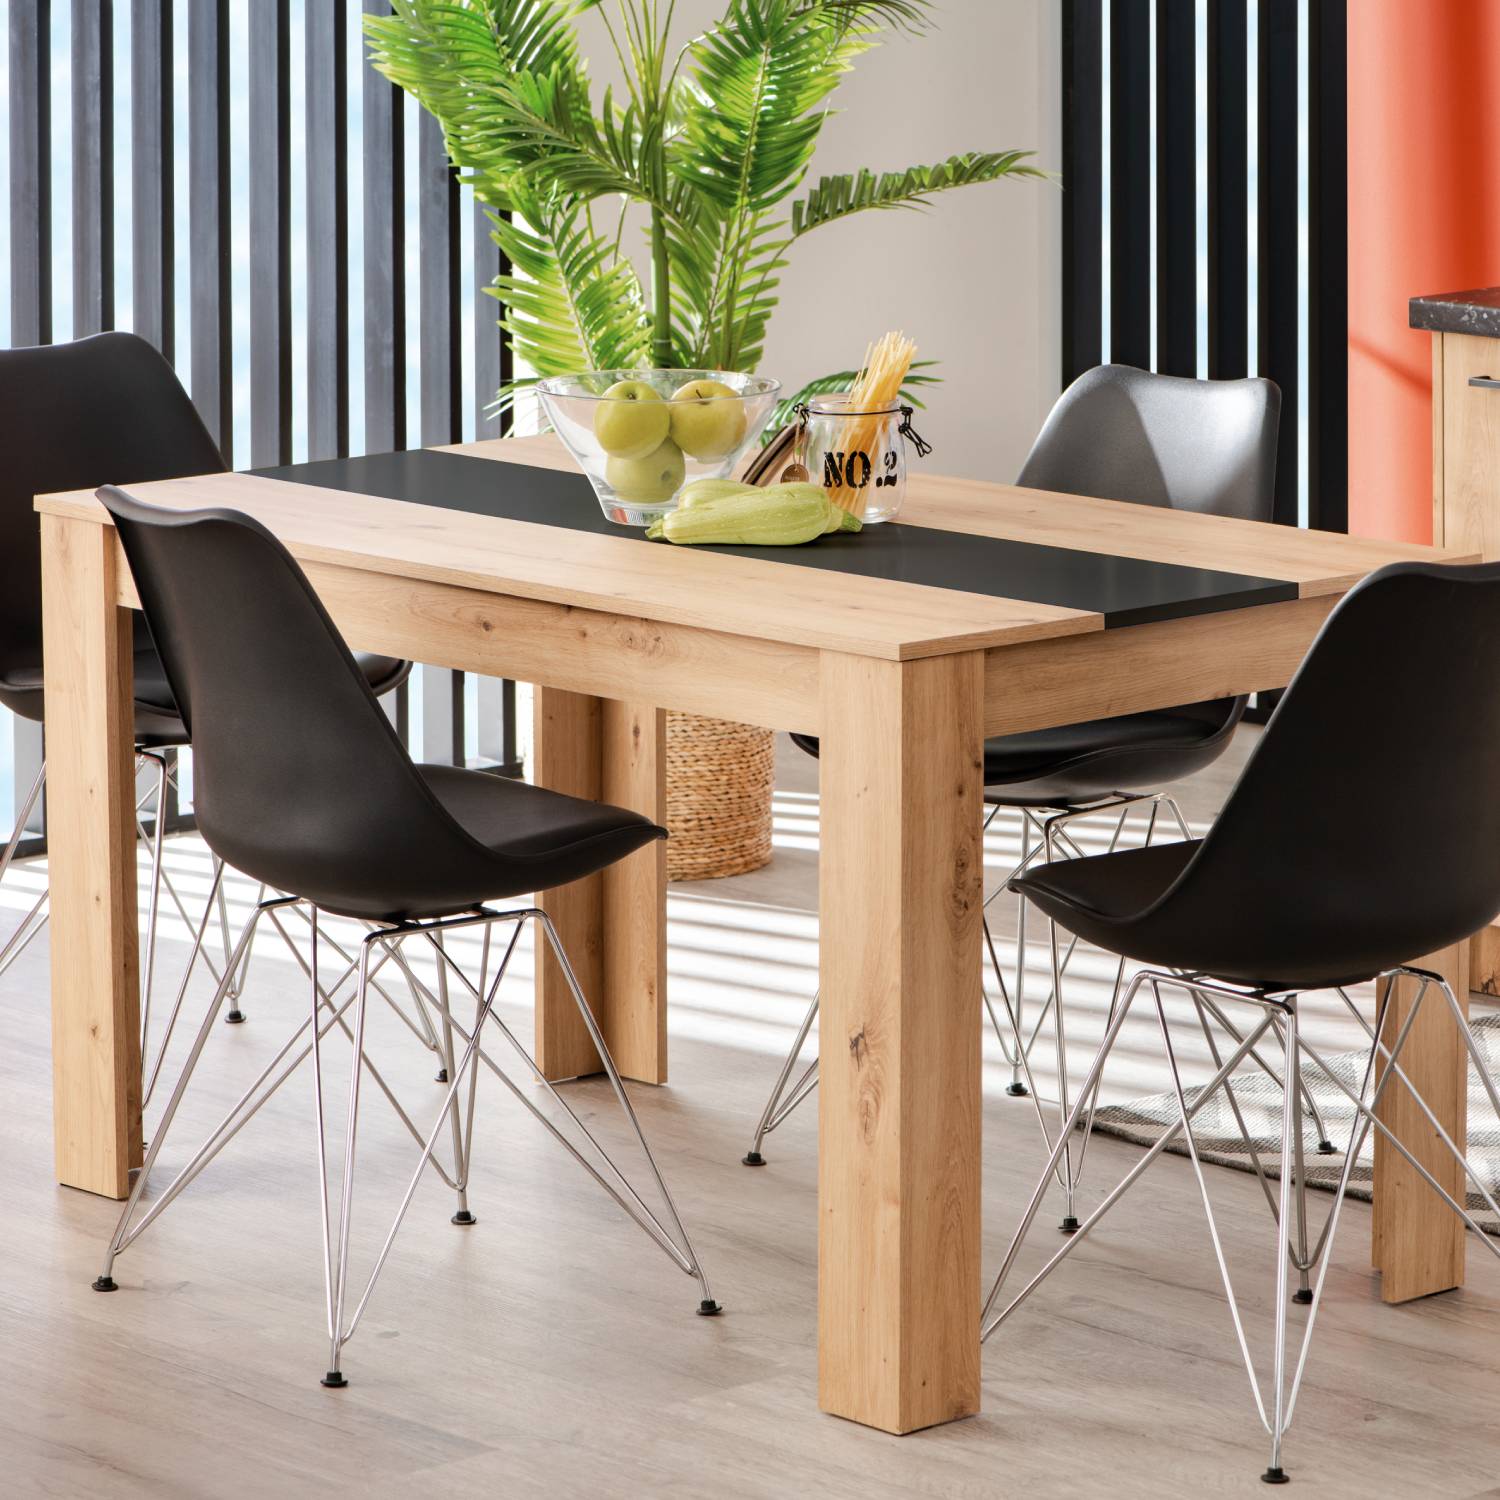 Modern Dining Table Kitchen Table Wooden Table 135x80 cm Oak Black 6 Seater